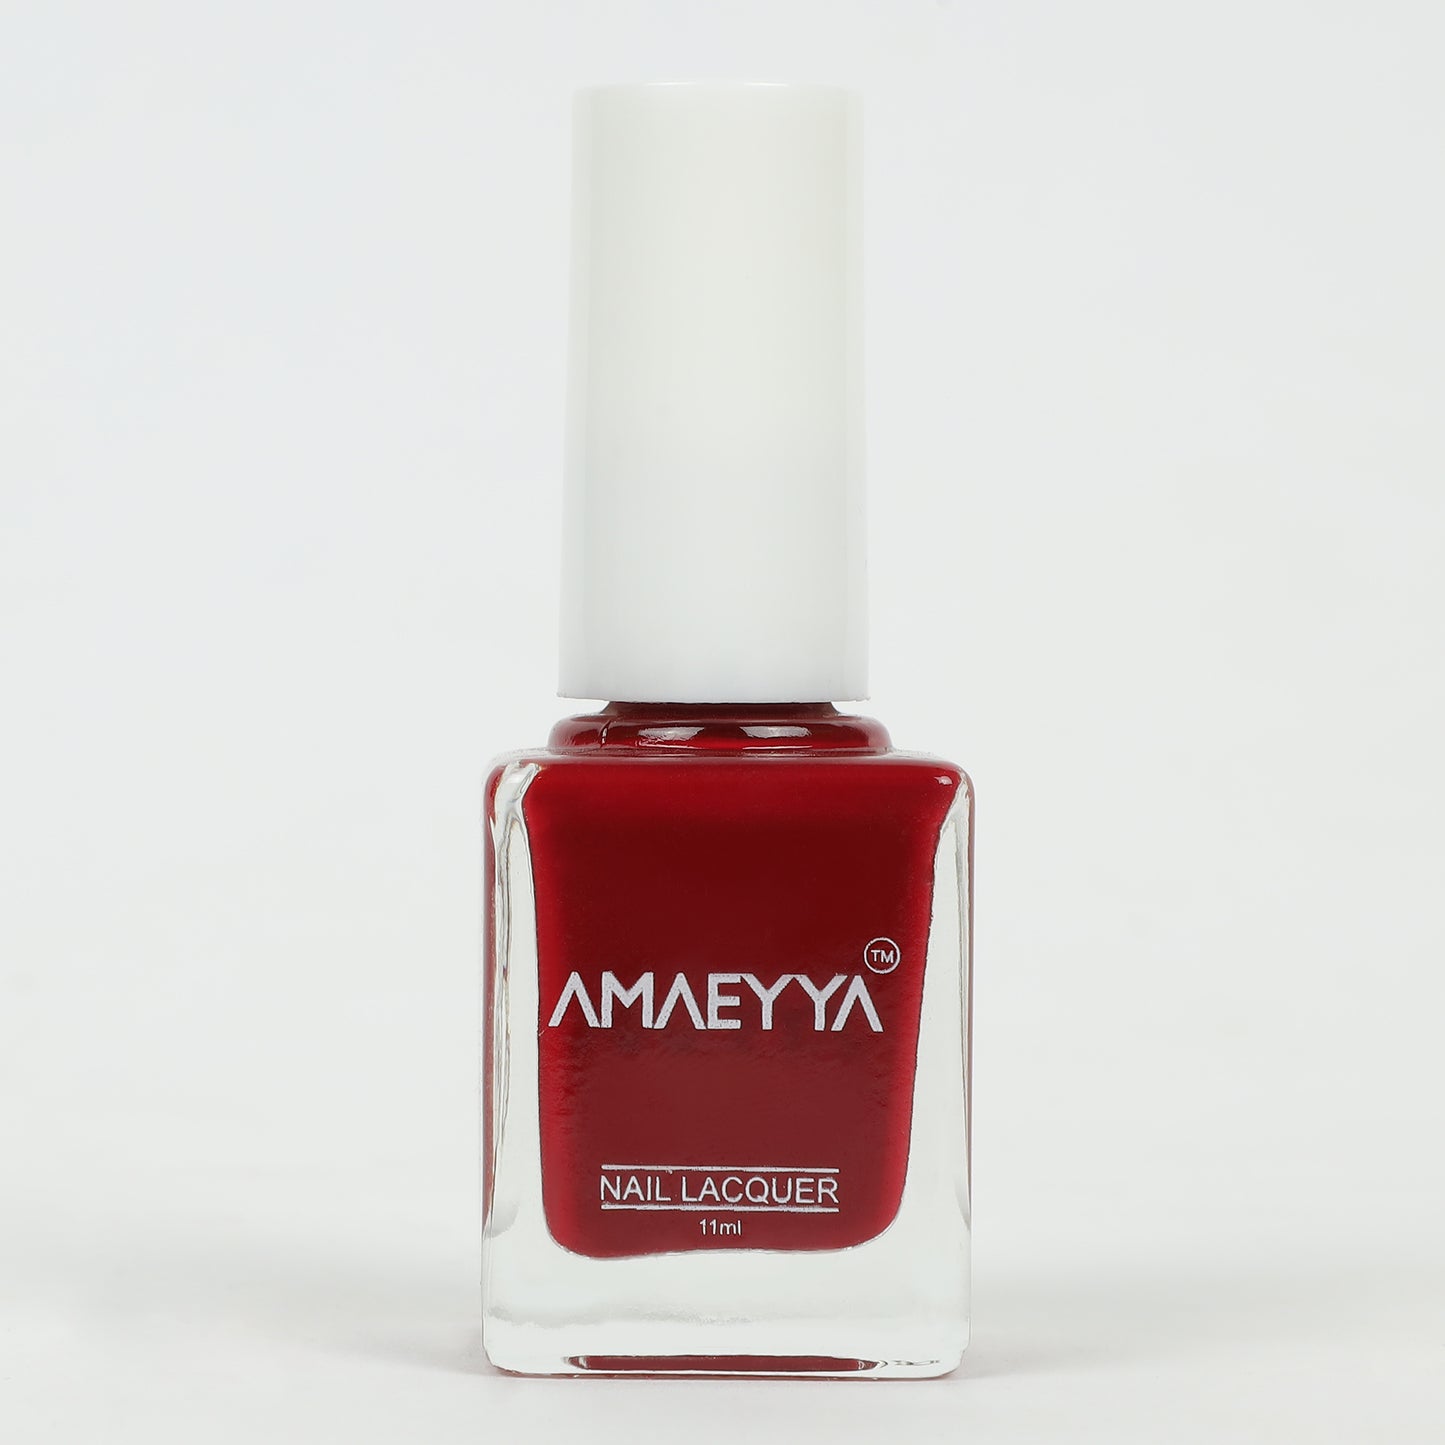 AMAEYYA WINE- HEAD OVER HEELS Nail Lacquer